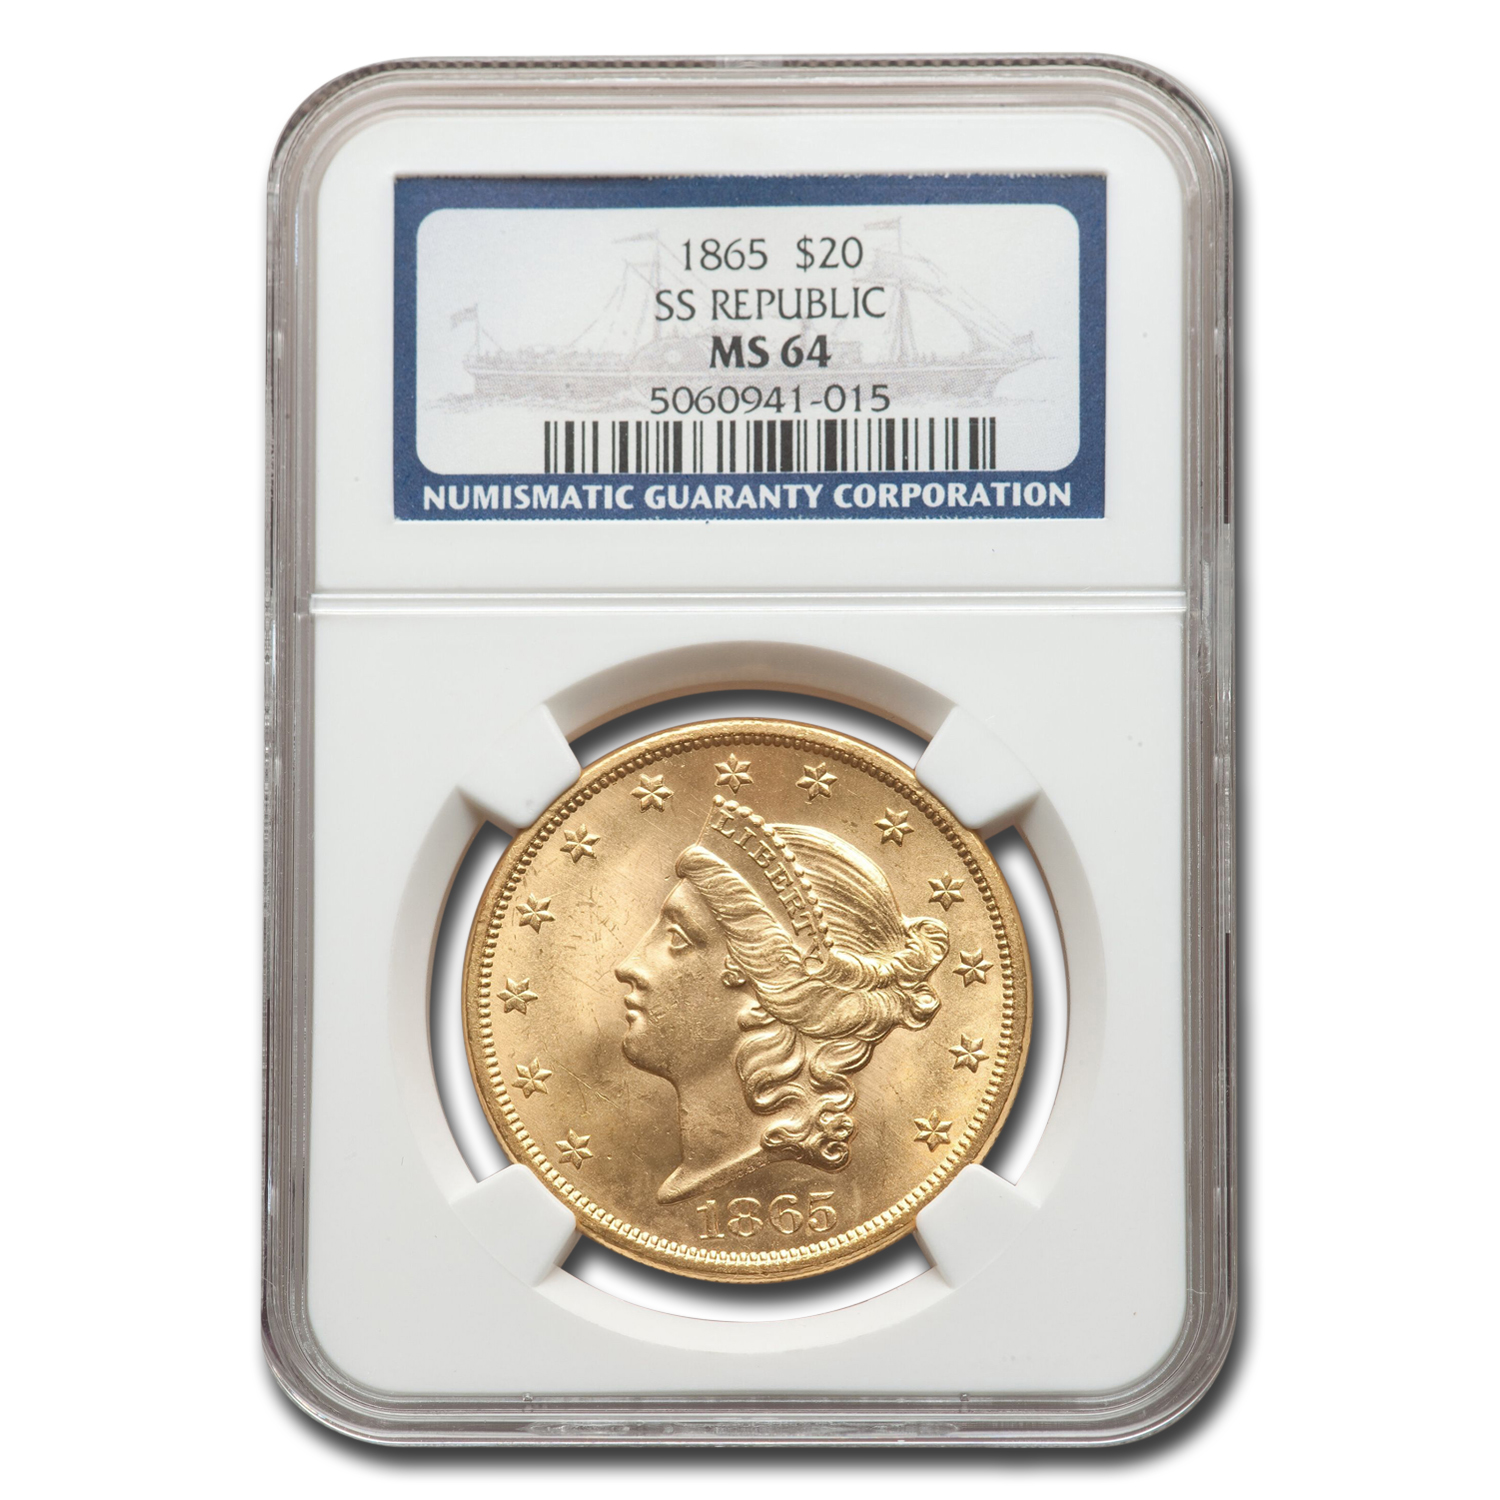 Buy 1865 $20 Liberty Gold Double Eagle MS-64 NGC (SS Republic)